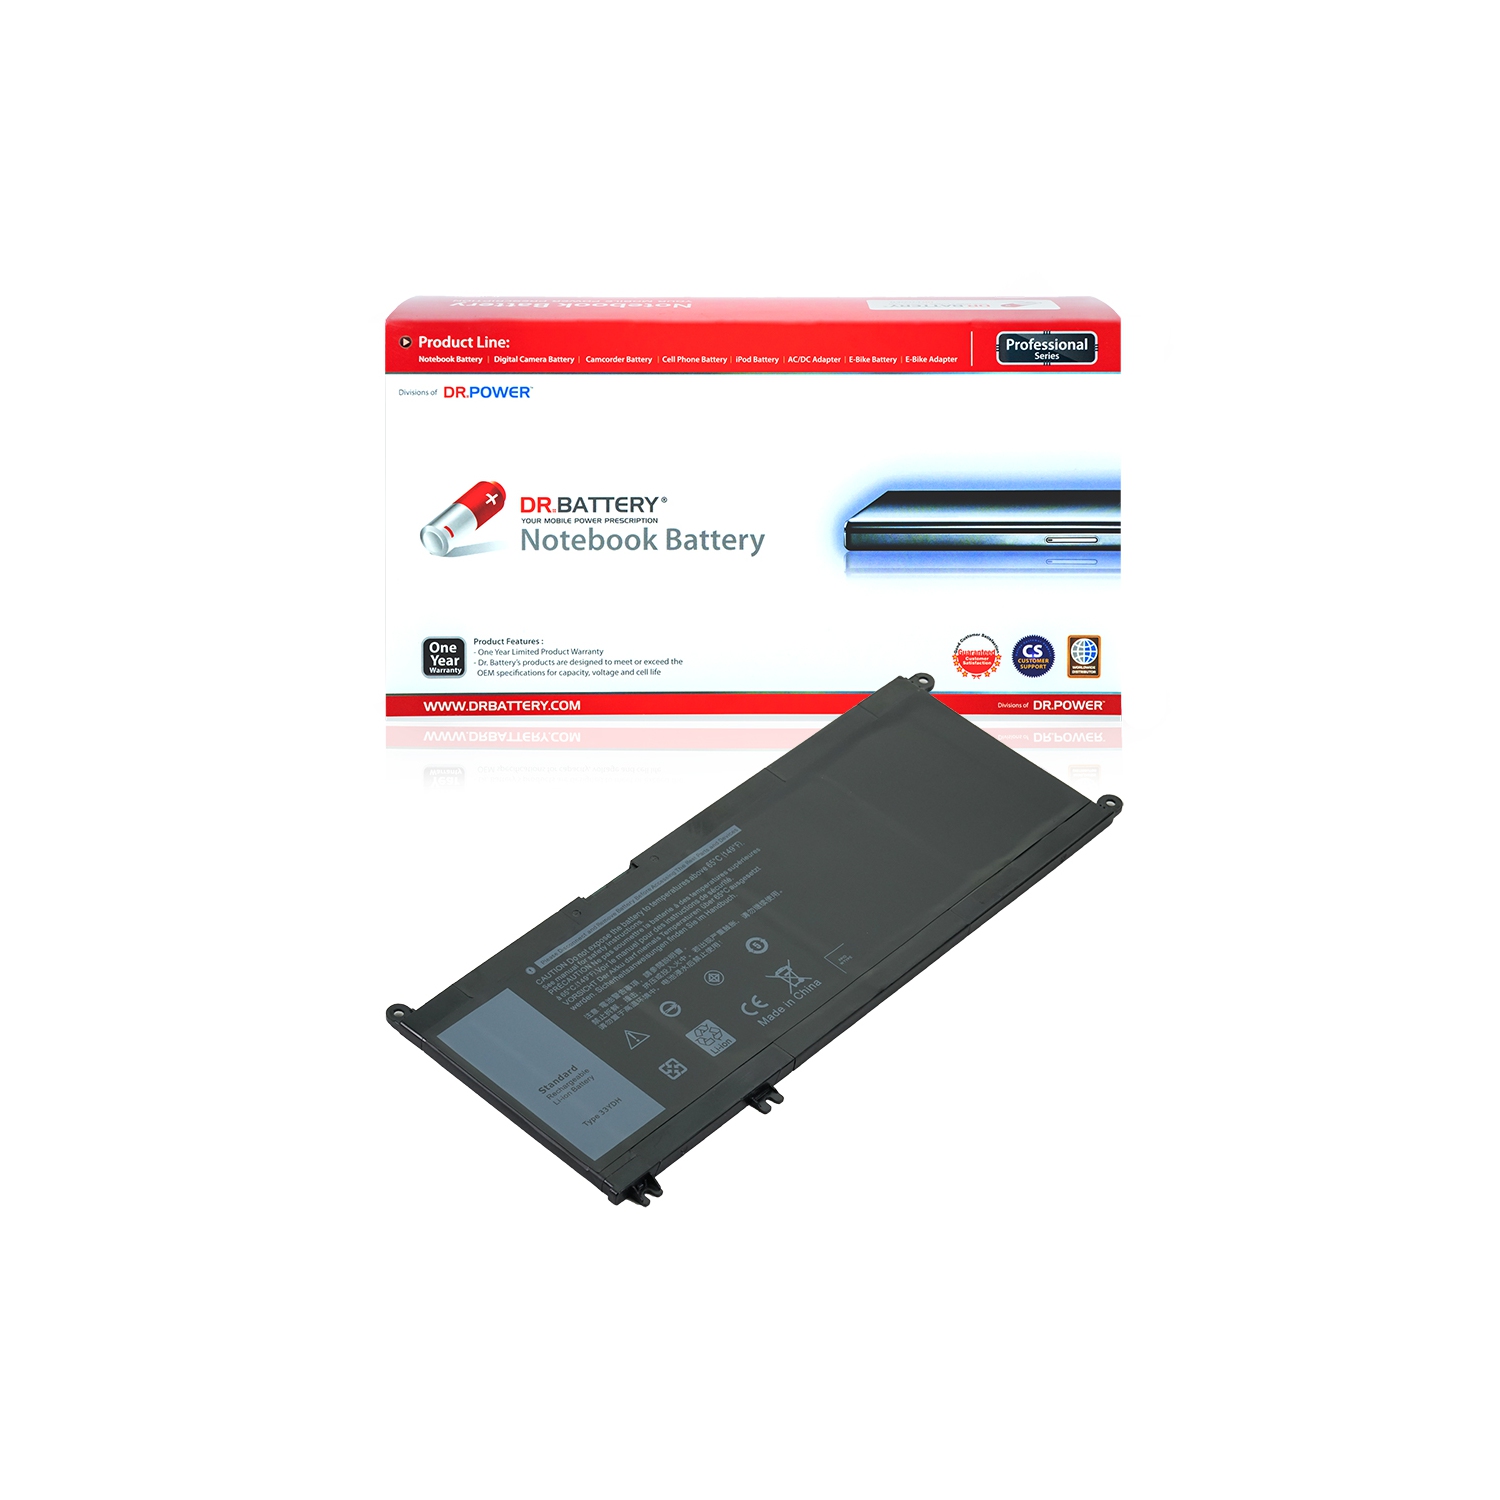 DR. BATTERY - Replacement for Dell G3 17 G5 15 5587 / Inspiron 17 7773 / Inspiron 17 7778 / 081PF3 / 0PVHT1 / 33YDH